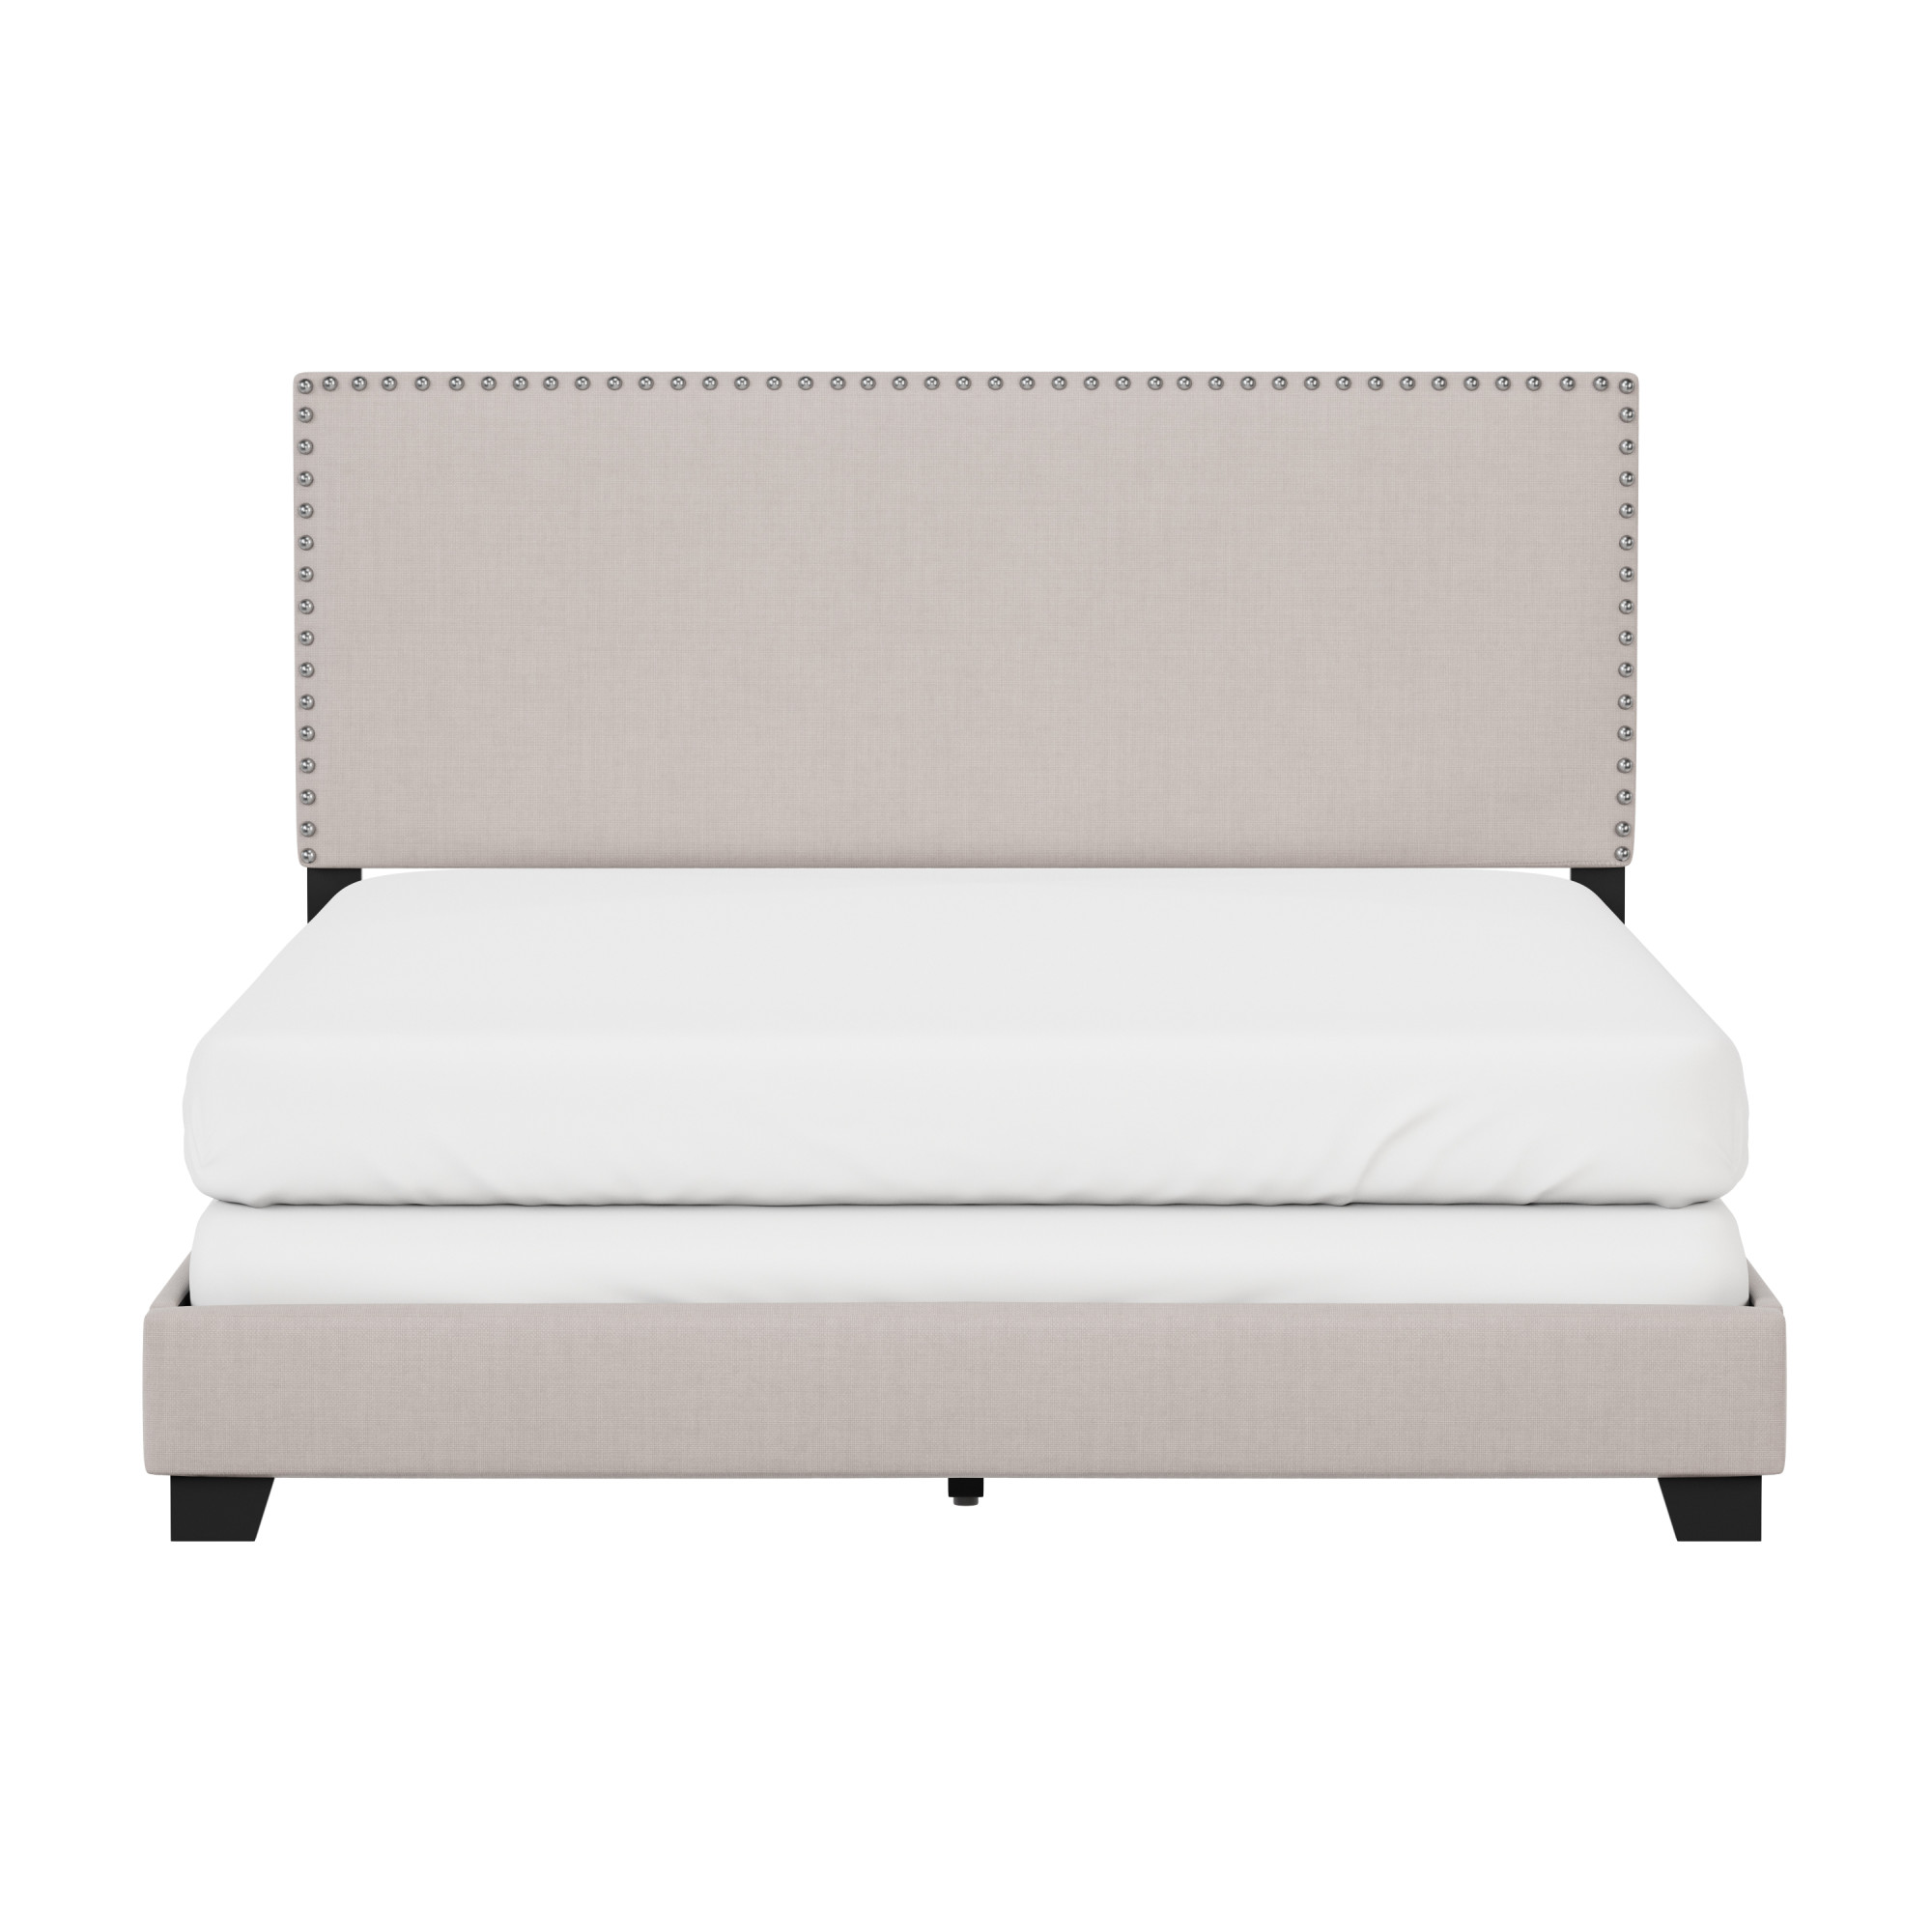 Willow Nailhead Trim Upholstered Queen Bed, Fog - image 2 of 16